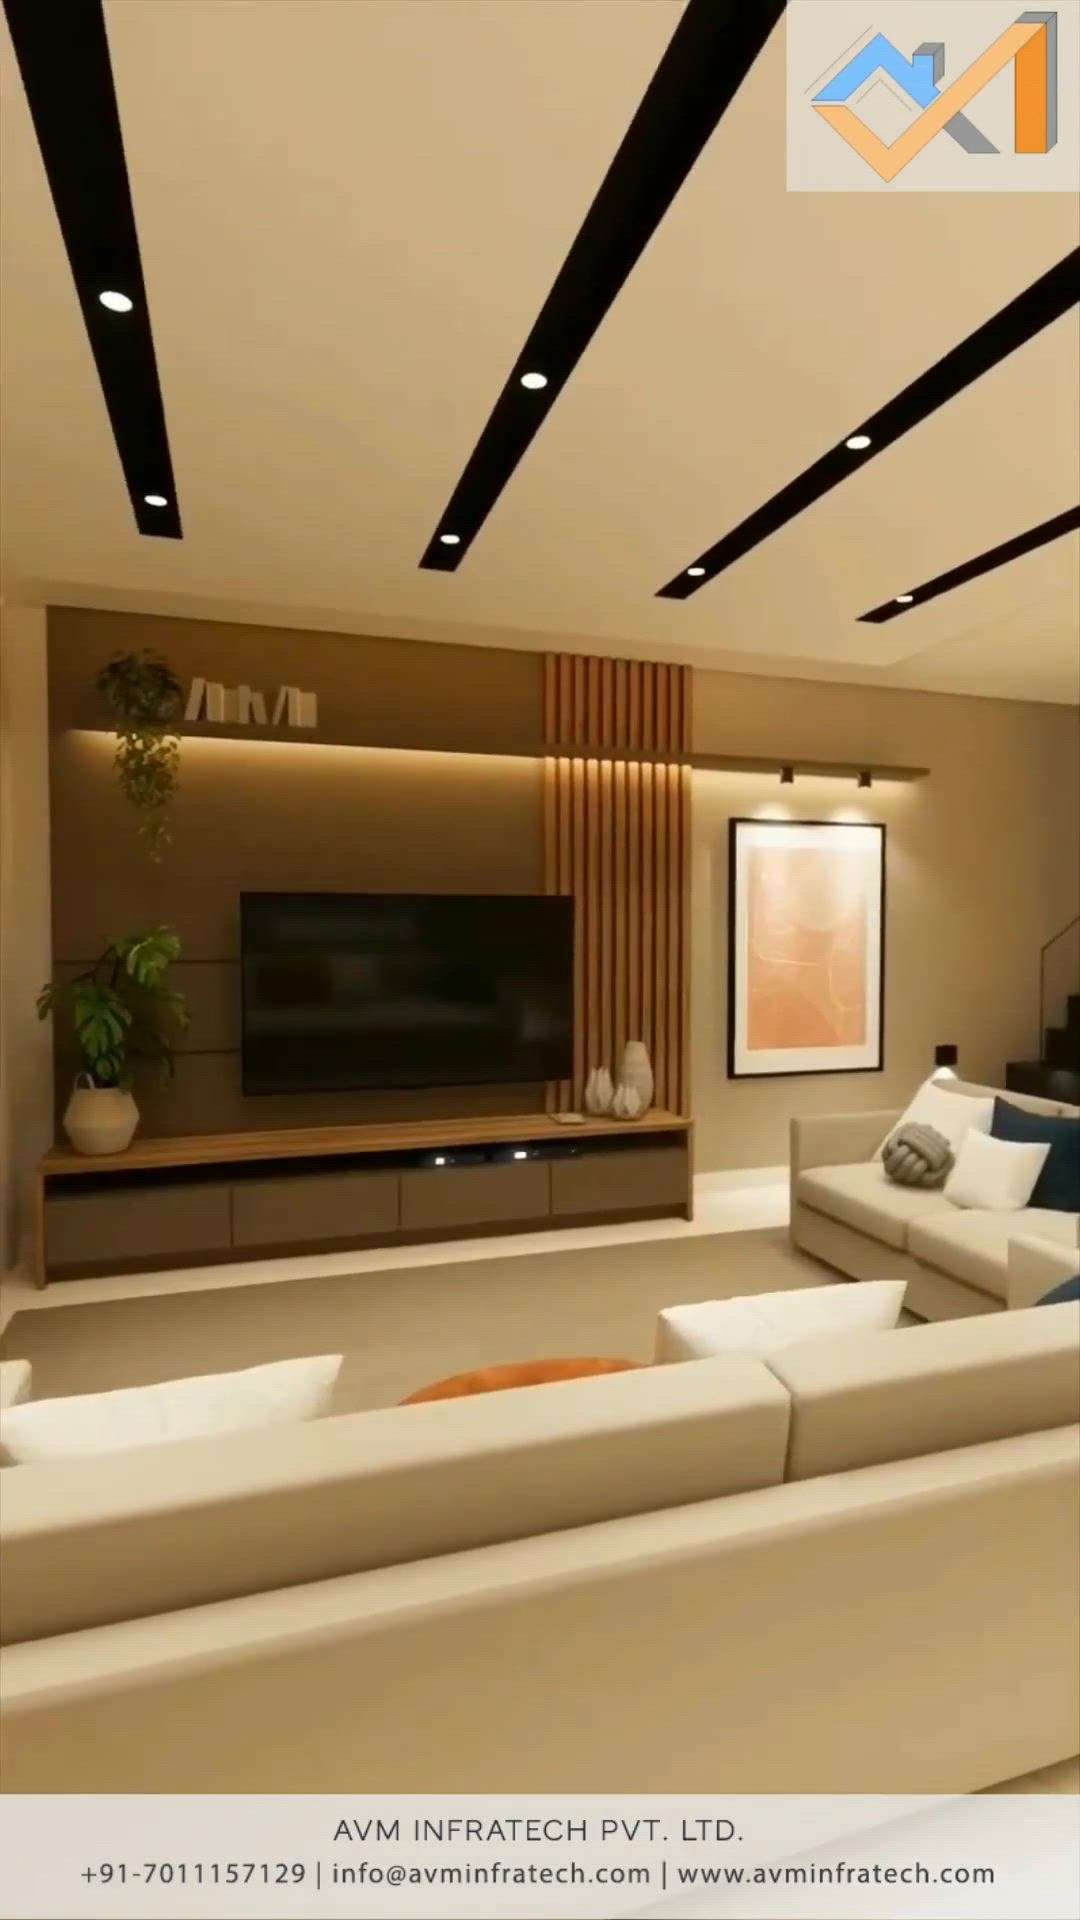 Simple yet sophisticated. Living room theme with neutral shades which will satiate your inner self. 


Follow us for more such amazing updates. 
.
.
#livingroom #livingroomdecoration #livingroomdetails #livingroominspiration #livingroomdesign #livingroomgoals #livingroomideas #livingroomdecor #livingroominspo #livingroomstyle #livingroomstyle #homedeco #homeinspiration #homemade #homedecor #homestyle #homeinterior #house #housedesign #housewarming #housegoals #avminfratech #housemusic #househunting